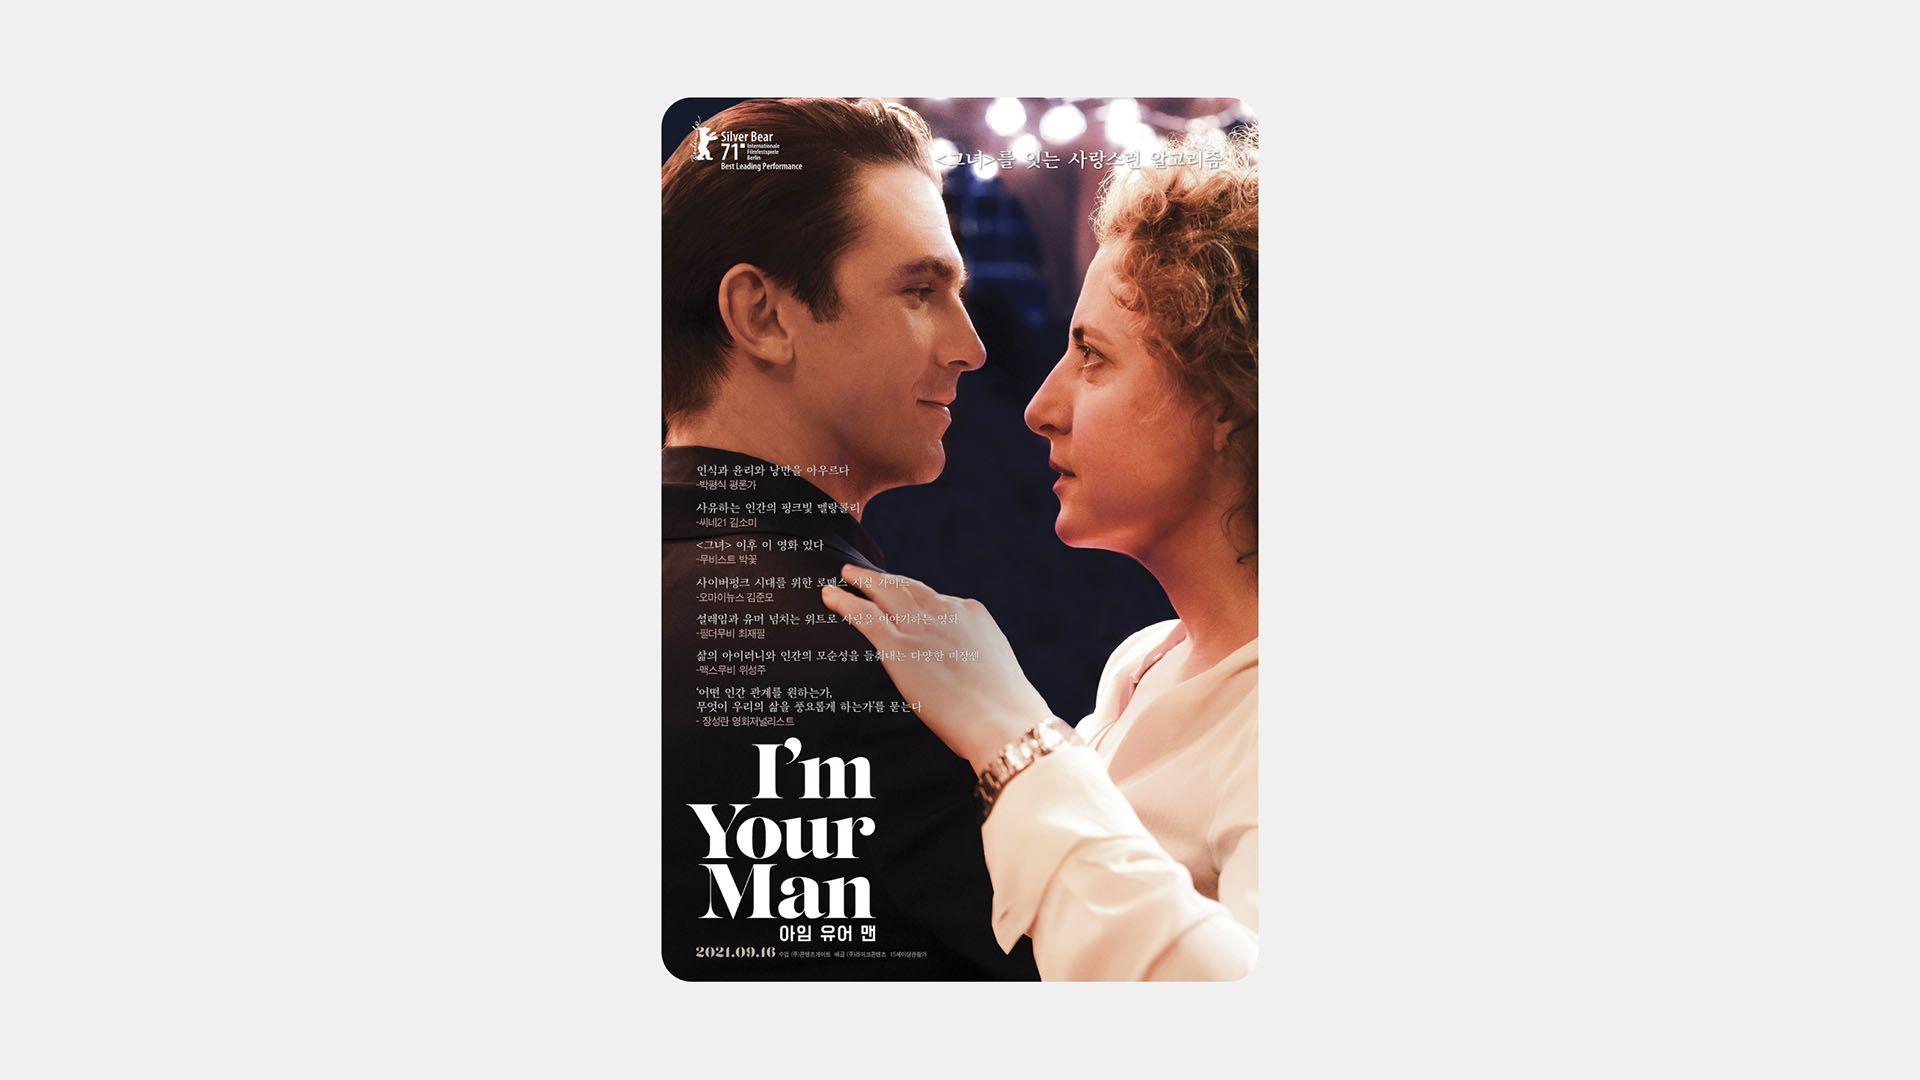 I am Your Man Movie Poster